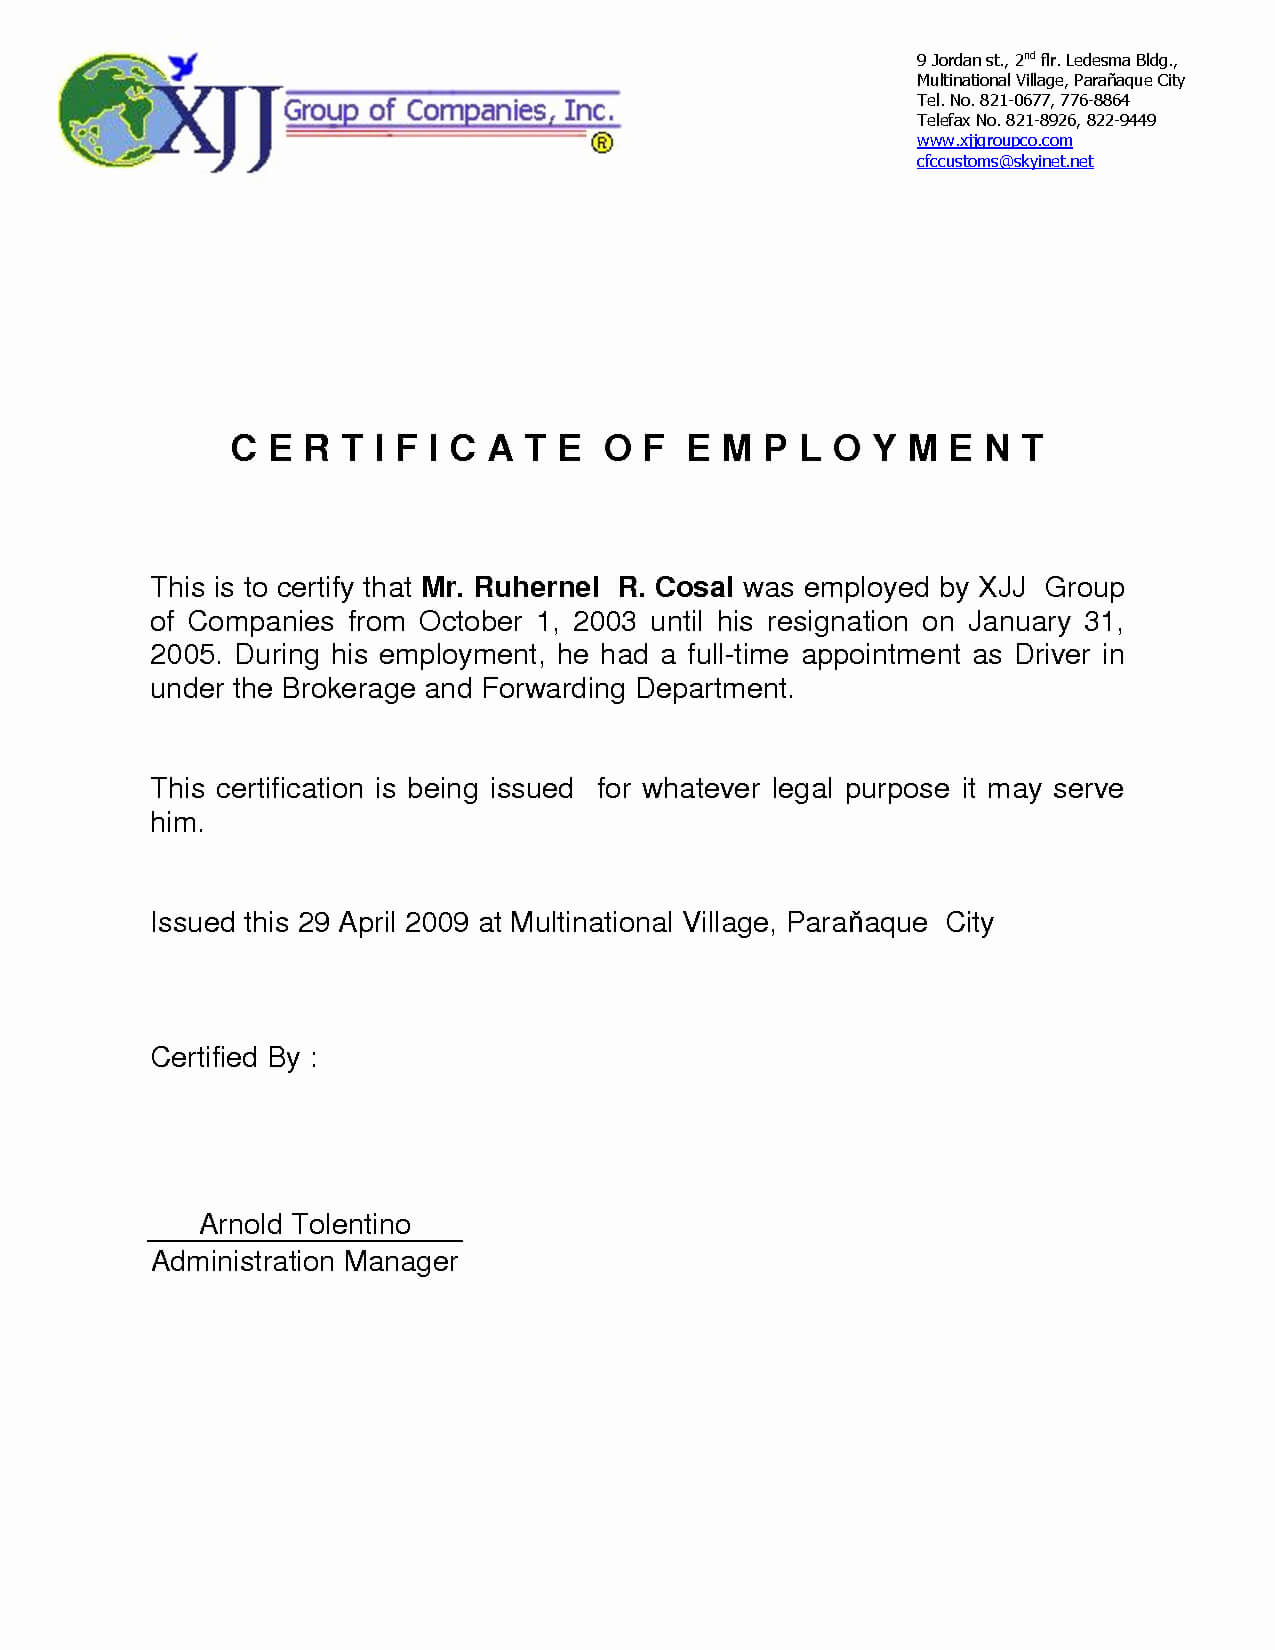 Certificate Of Employment Template Best Of Sample Pertaining To Employee Certificate Of Service Template